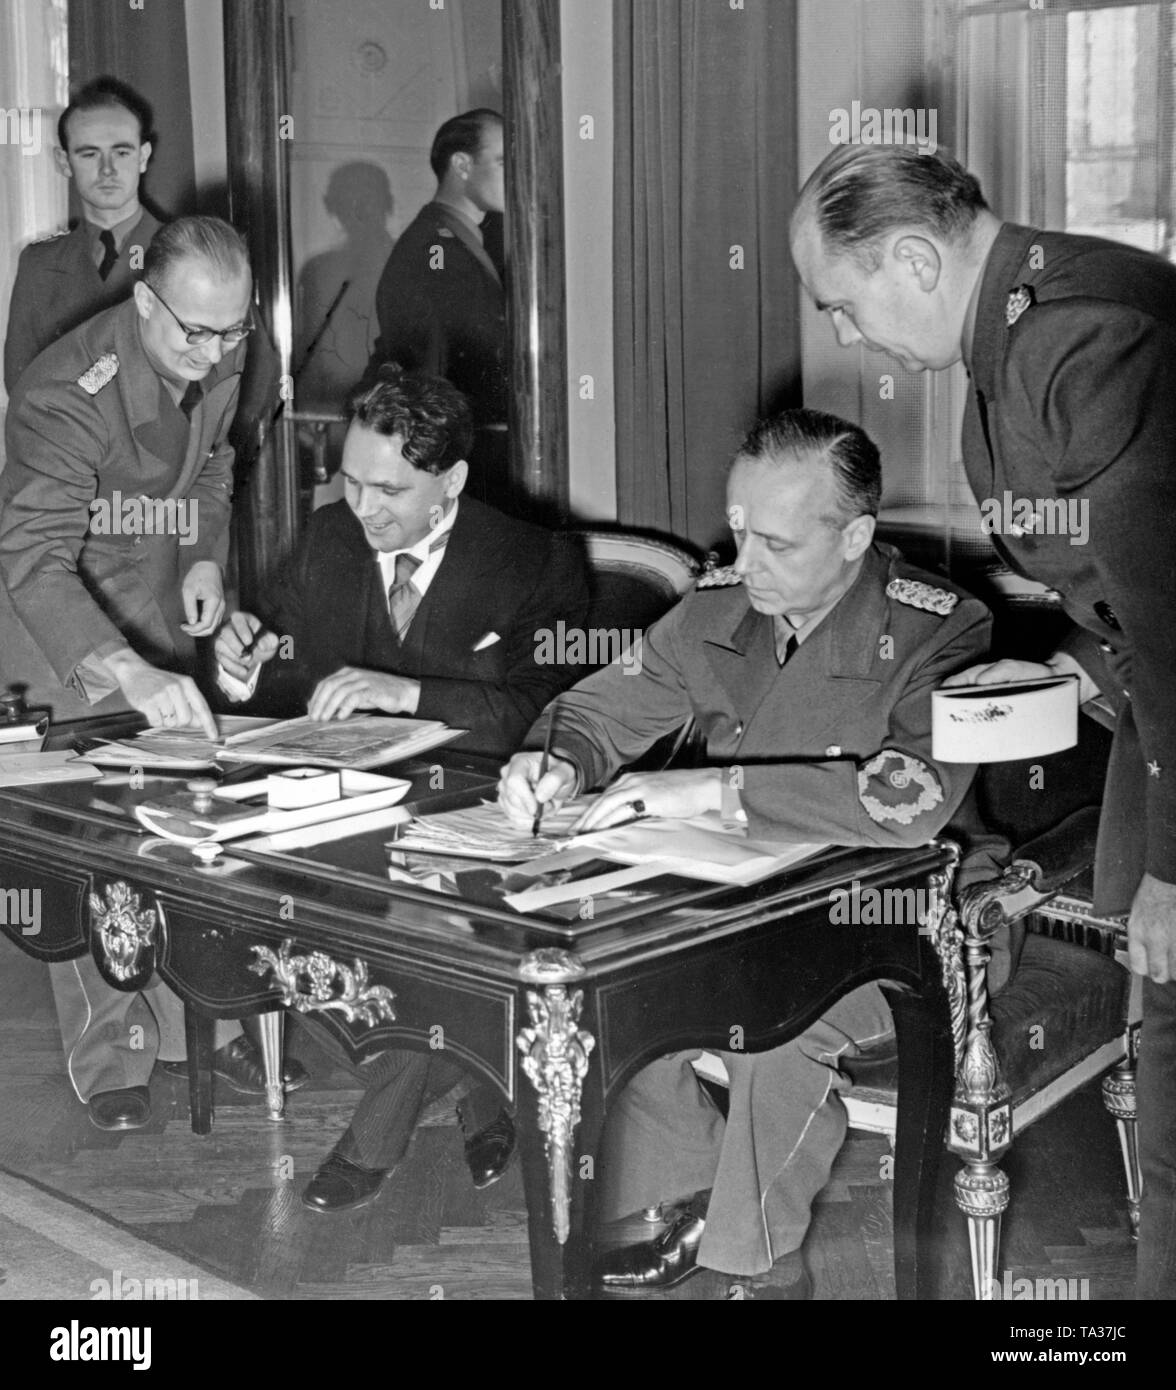 Matus Cernak (2nd from left) and Joachim von Ribbentrop (2nd from right) sign the German-Slovakian Treaty at the Federal Foreign Office in Berlin. To Cernak's left, Envoy Heinburg and to Rippentrop's right, Envoy Schmidt. The first Slovak Republic was founded on Hitler's command in March 1939, and Bohemia and Moravia were occupied by the Wehrmacht. Stock Photo